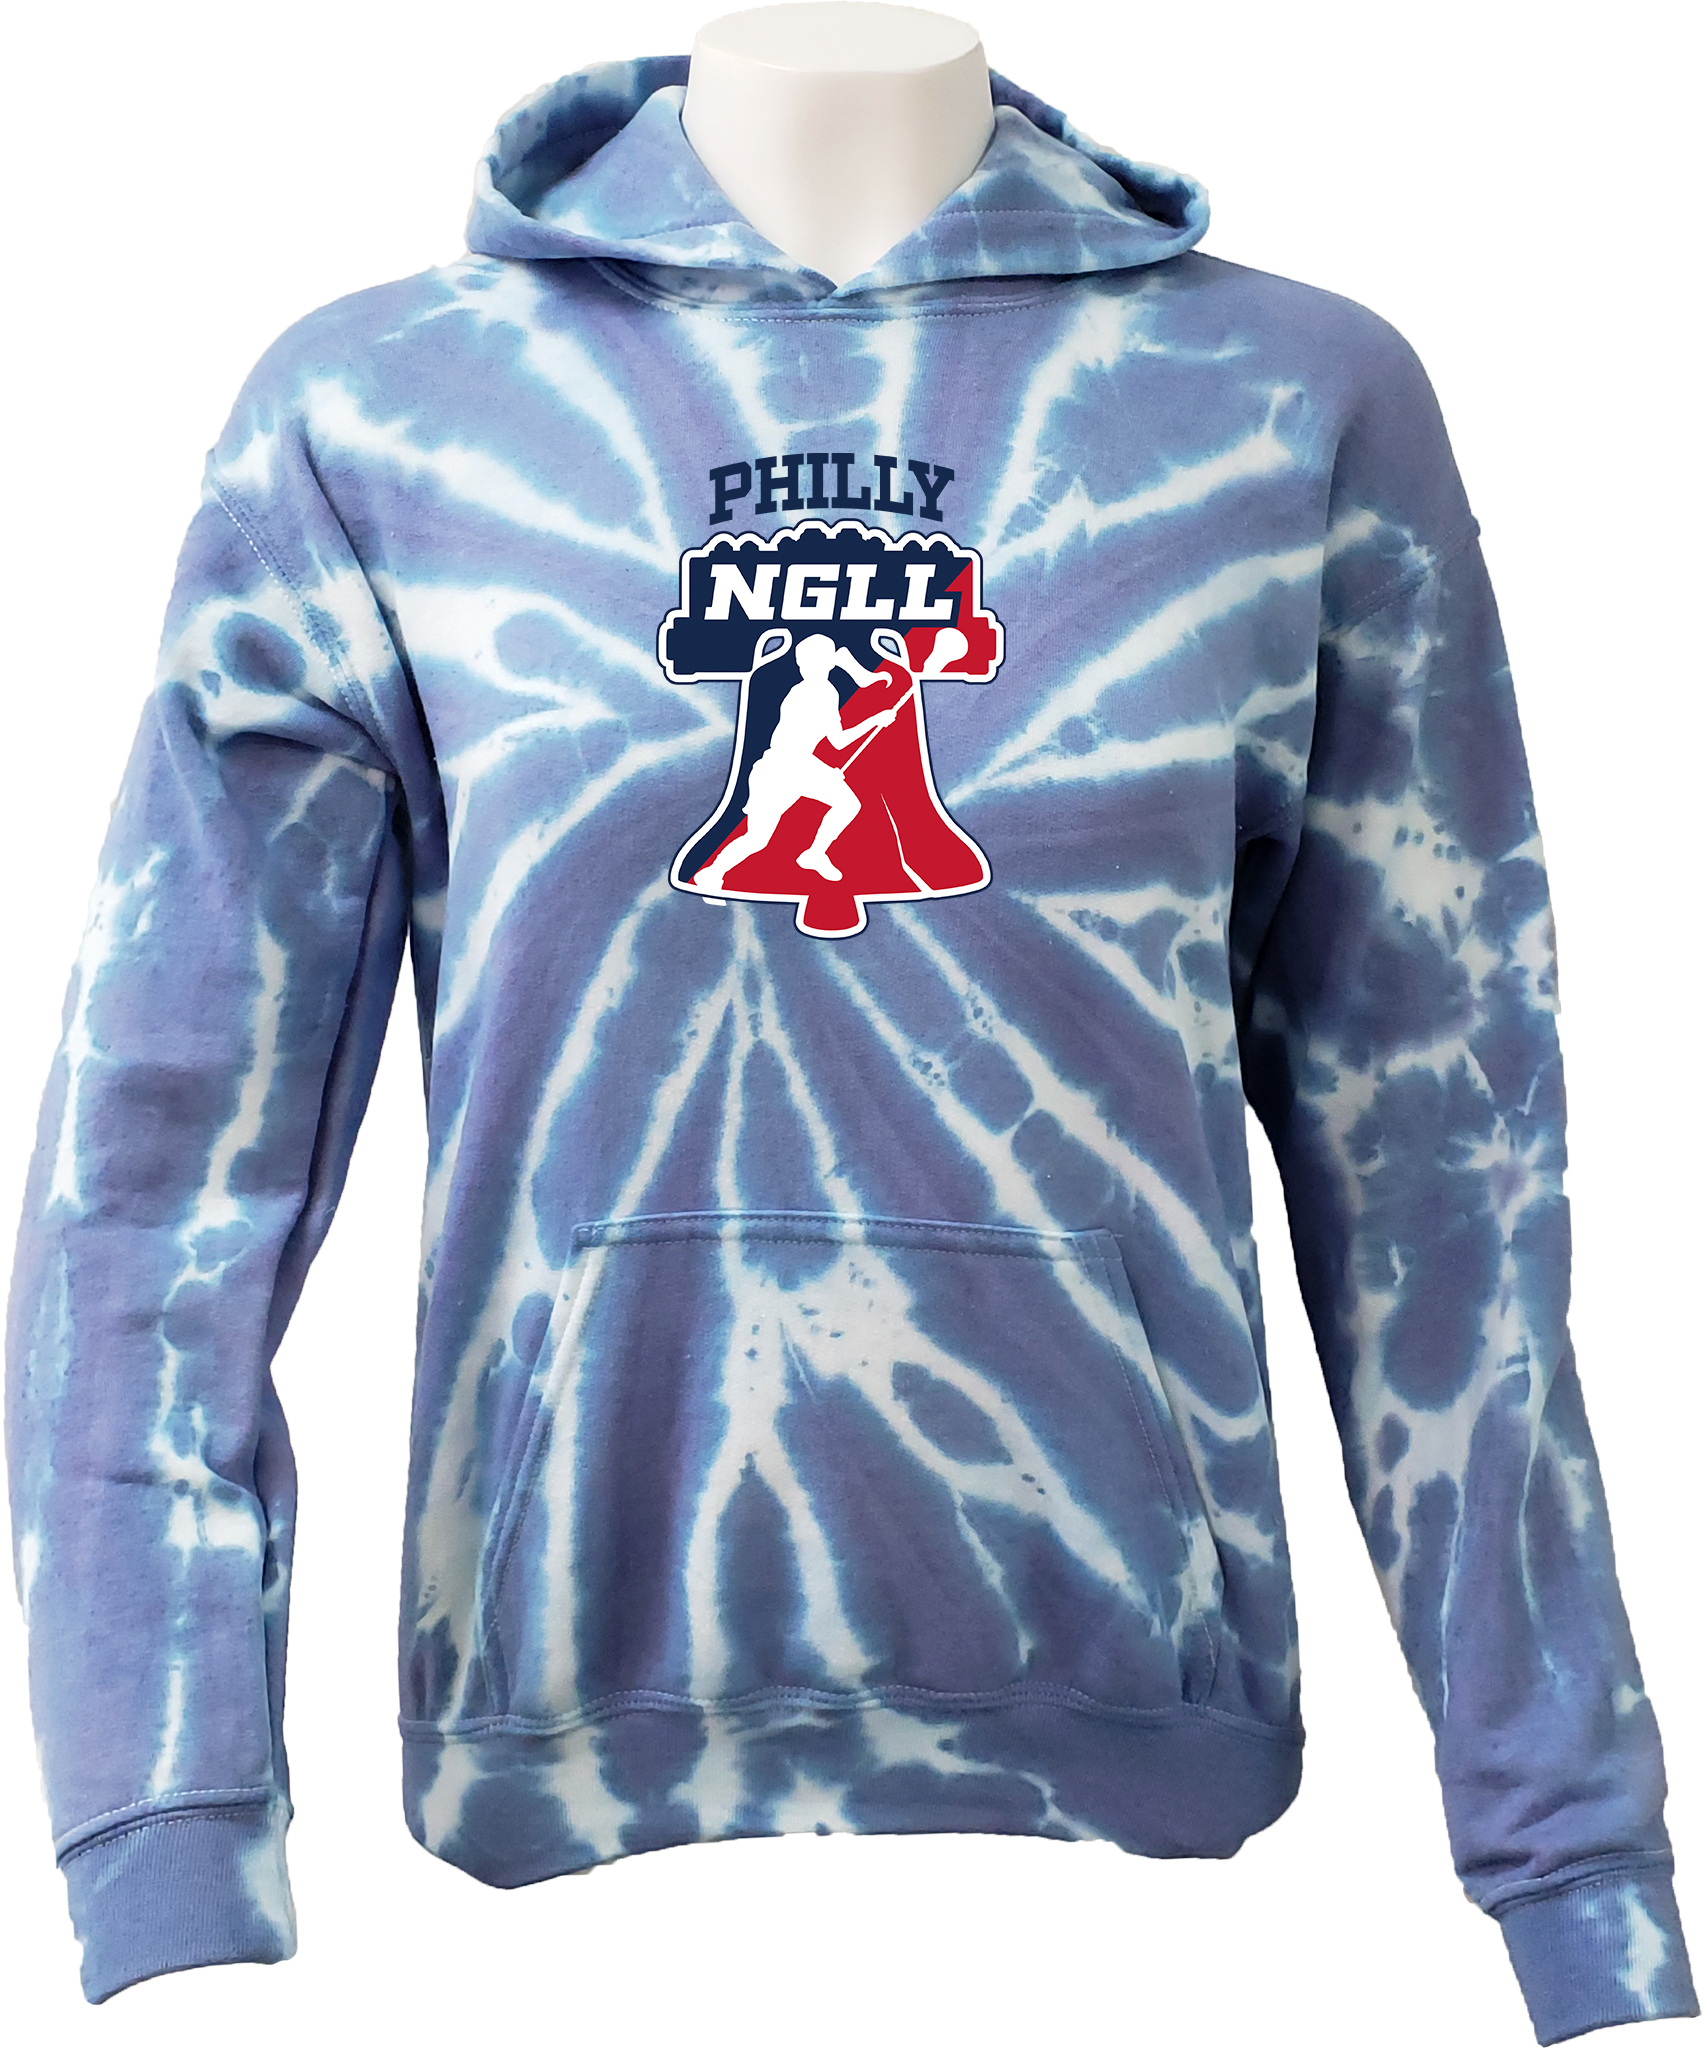 TIE-DYE HOODIES - 2023 NGLL Philly